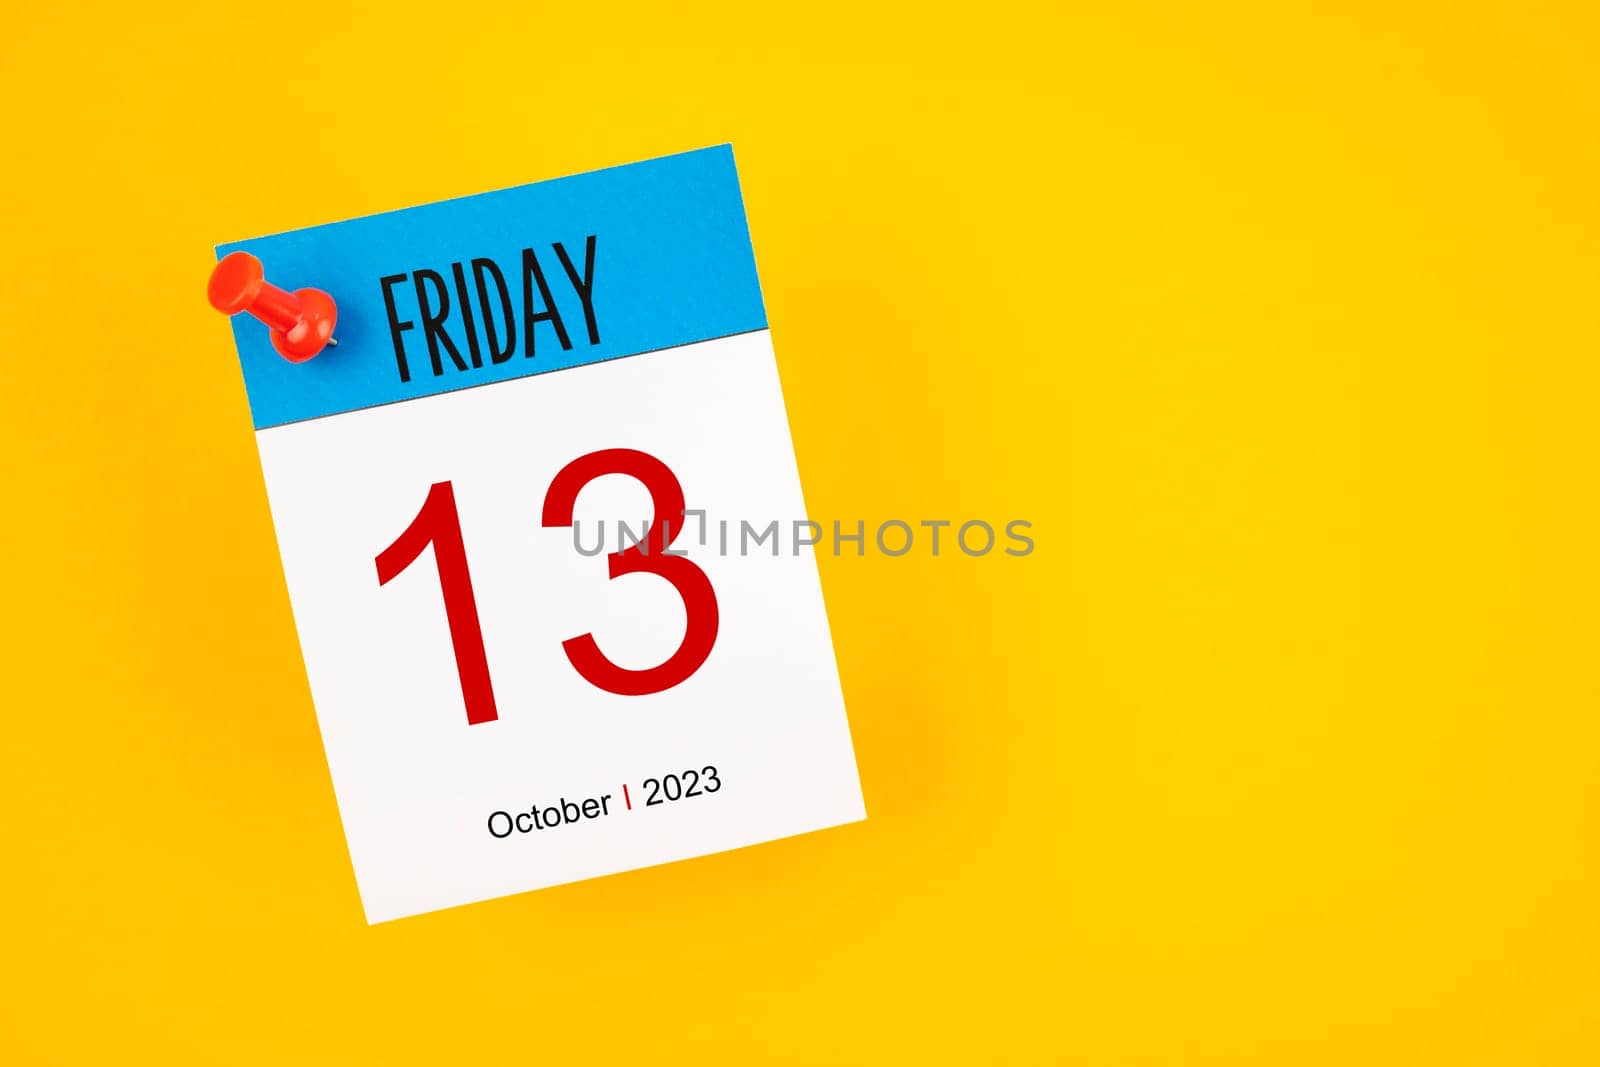 Calendar Friday the 13th October 2023 and push pin on yellow background.